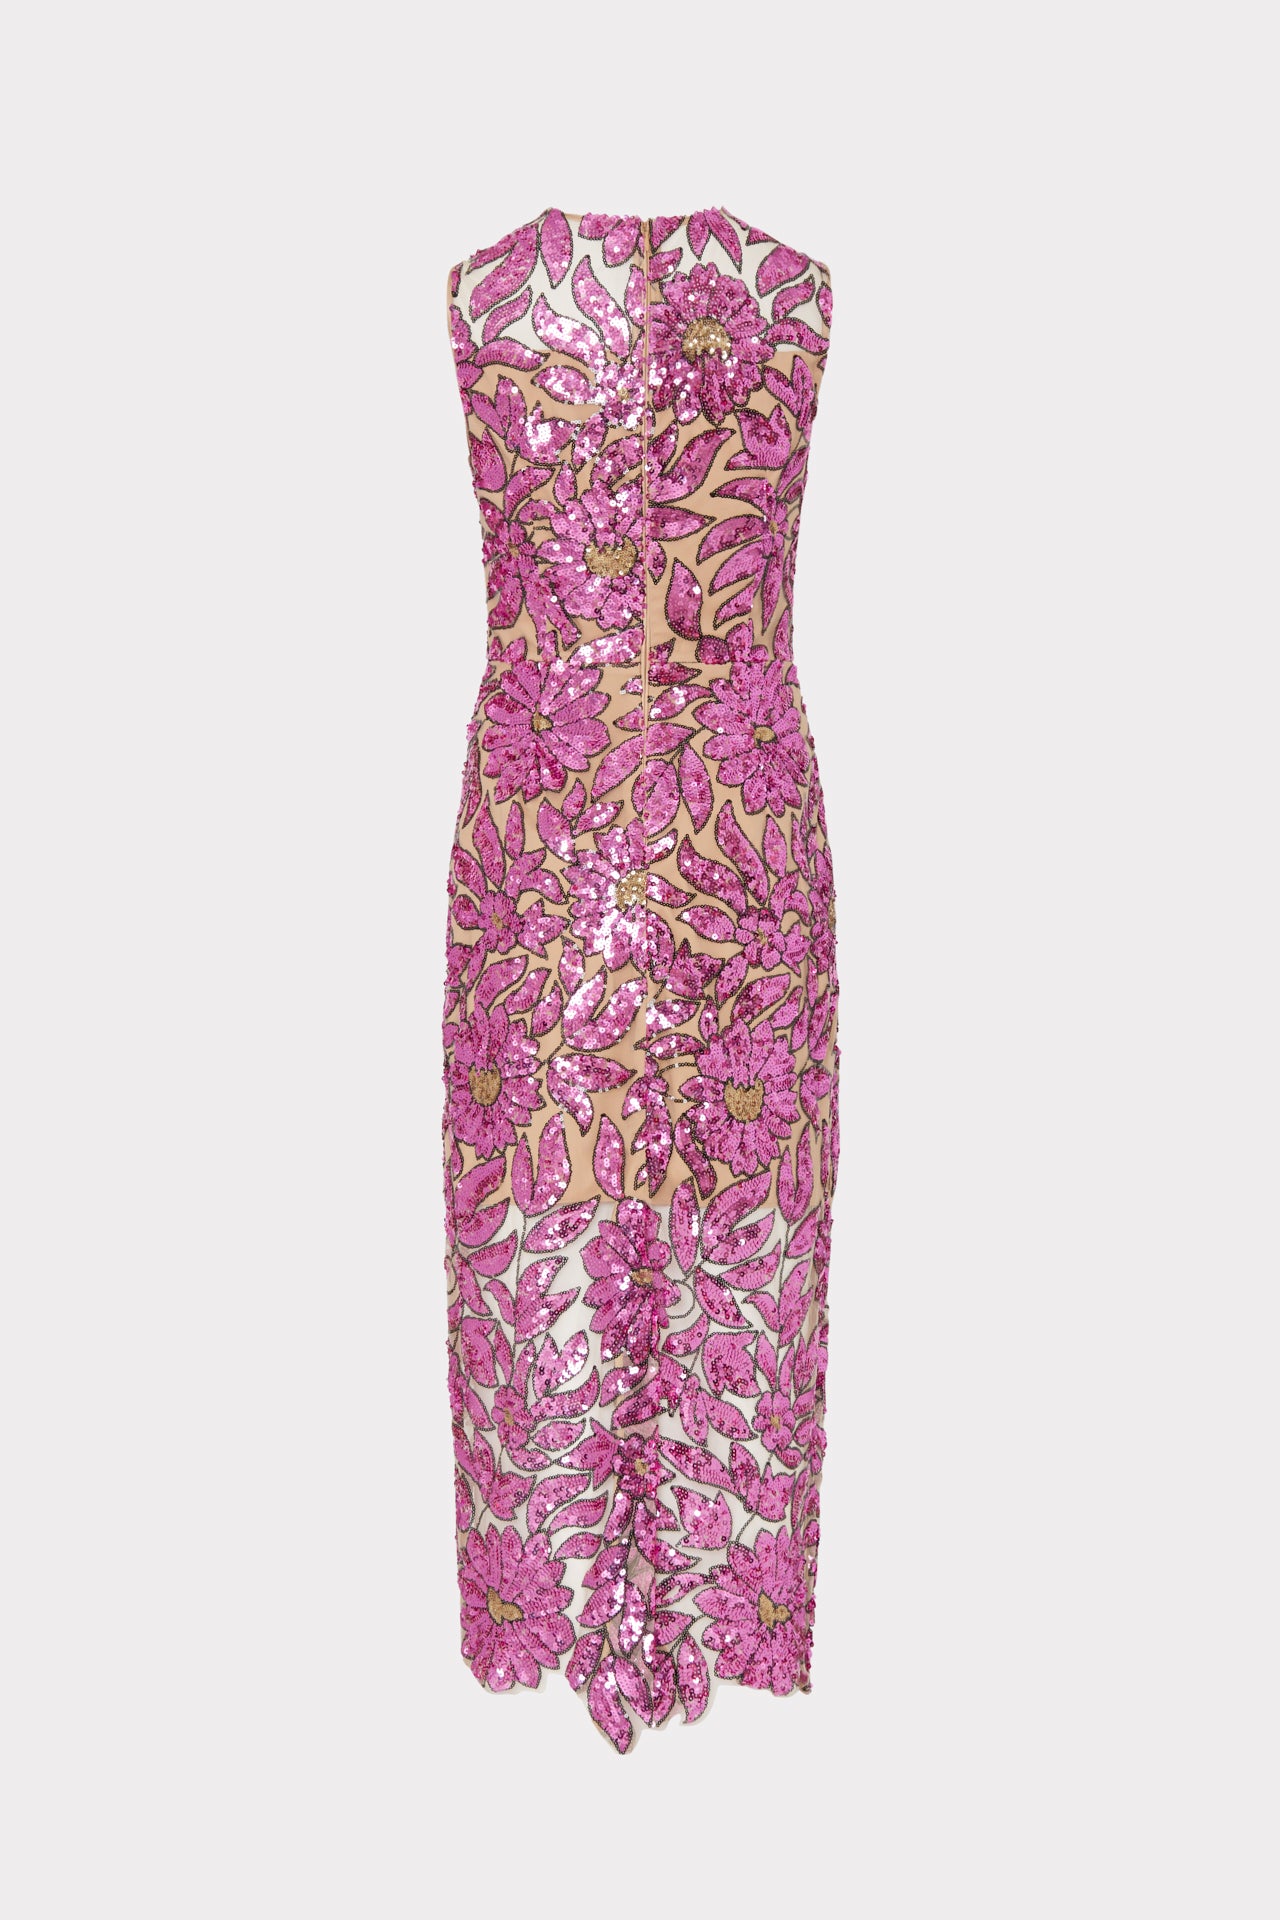 Kinsley Floral Garden Sequin Dress in Pink Multi | MILLY